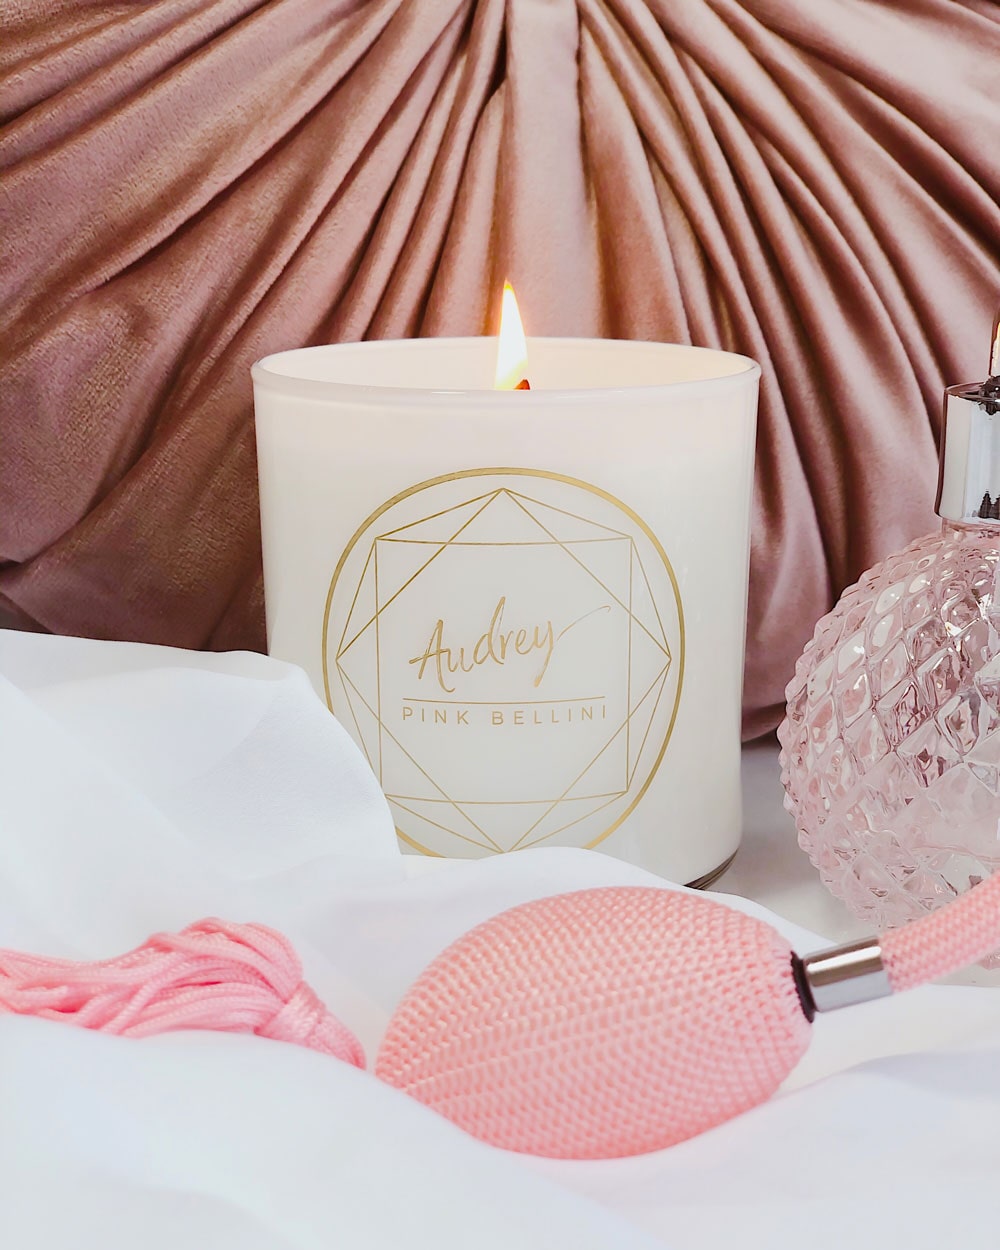 Audrey • Pink Bellini Candle